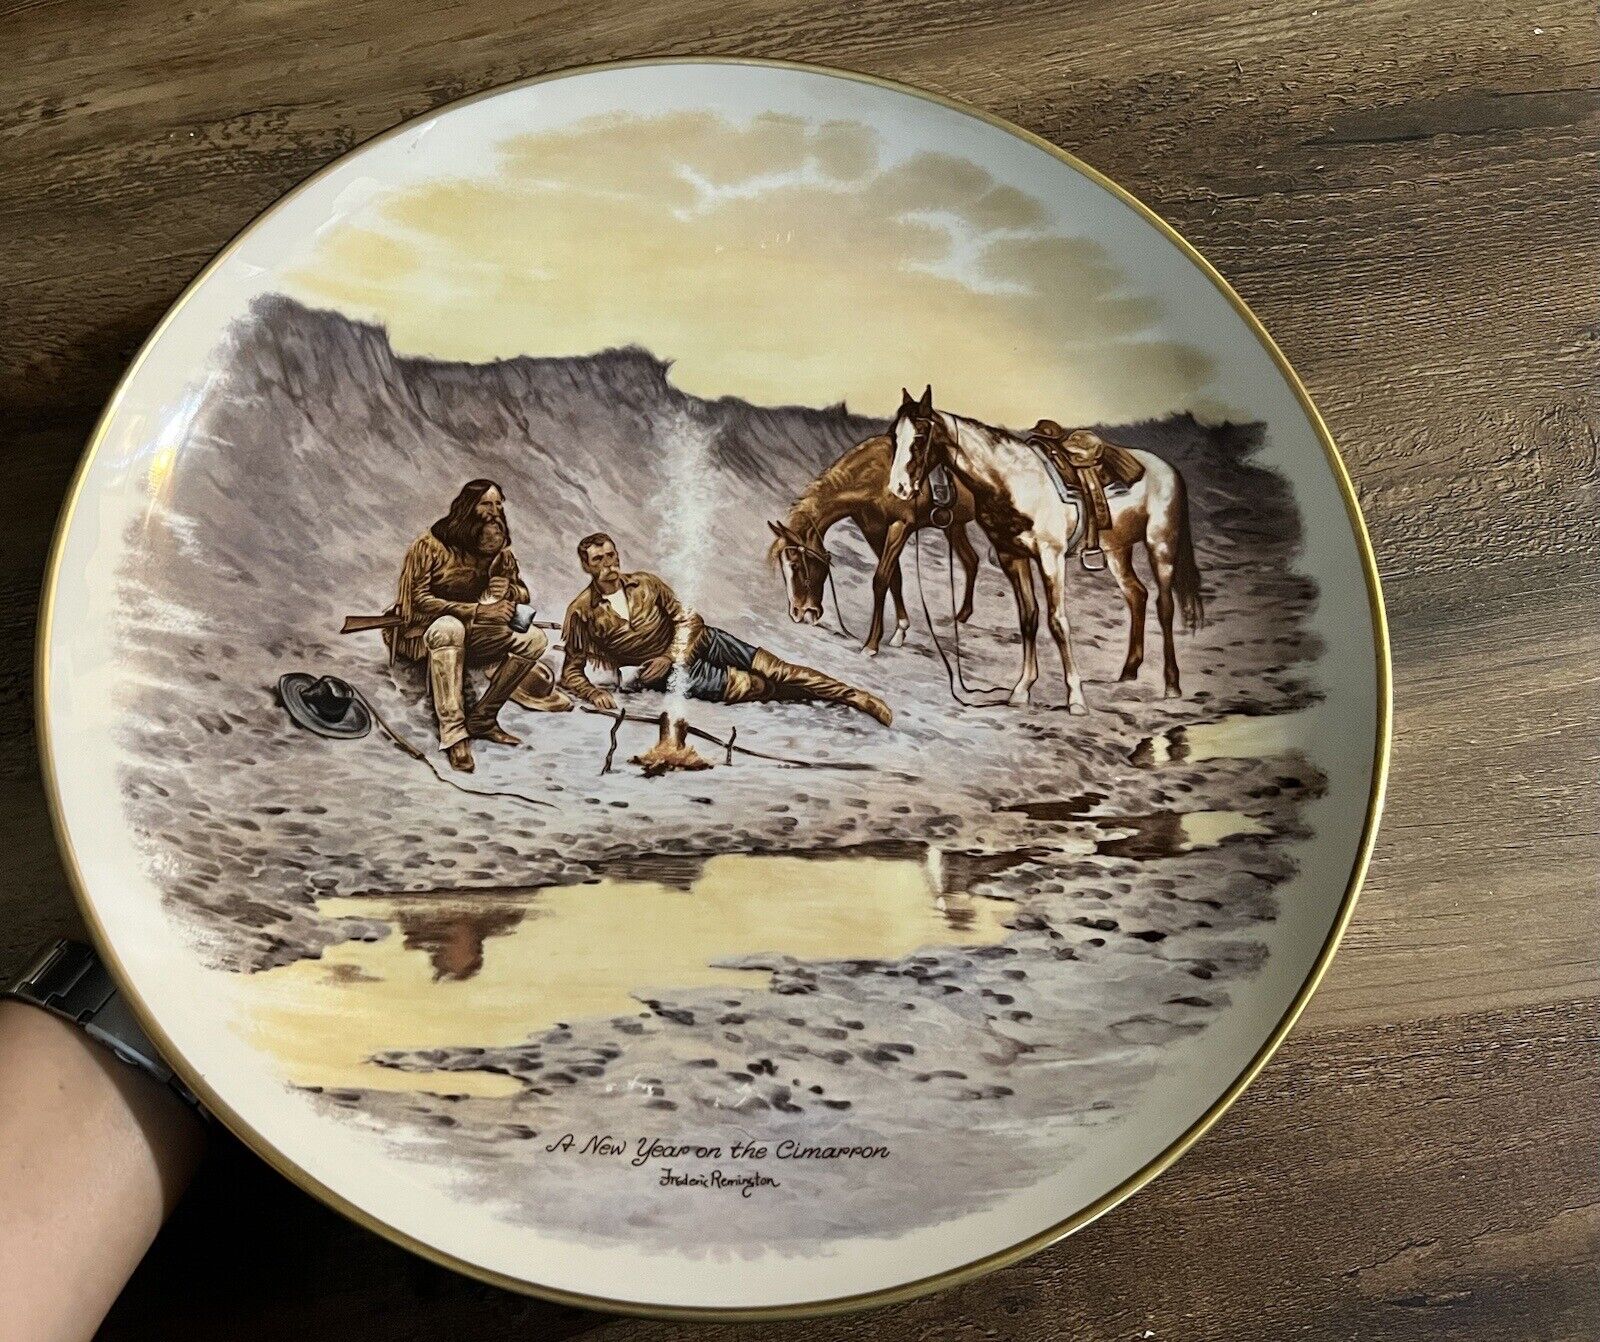 VINTAGE GORHAM FINE CHINA PLATE 'A New Year on the Cimarron'  F.REMINGTON 1973